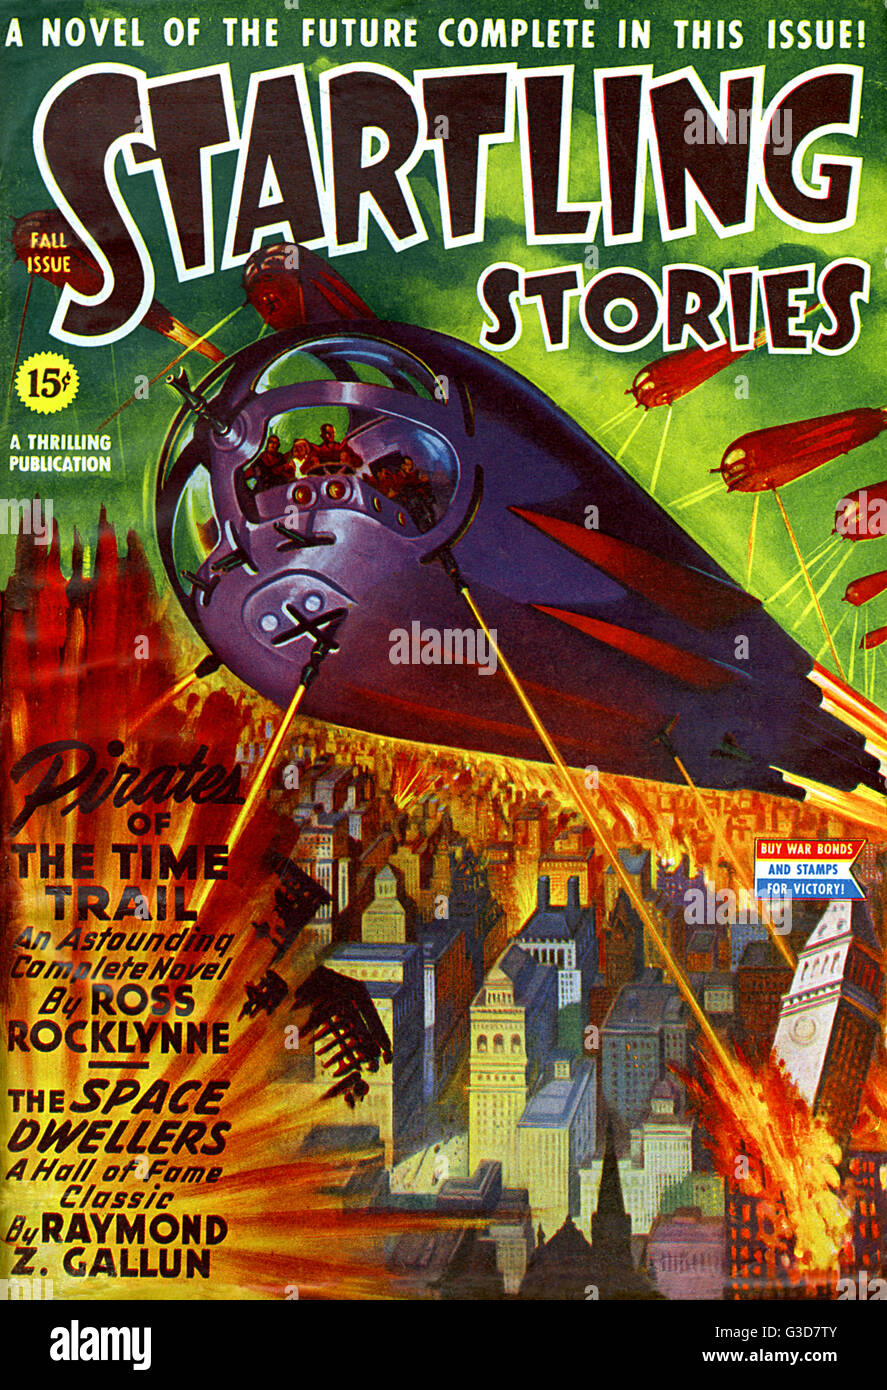 Histoires surprenantes - Sci Fi Mag - Pirates of the Time Trail Banque D'Images